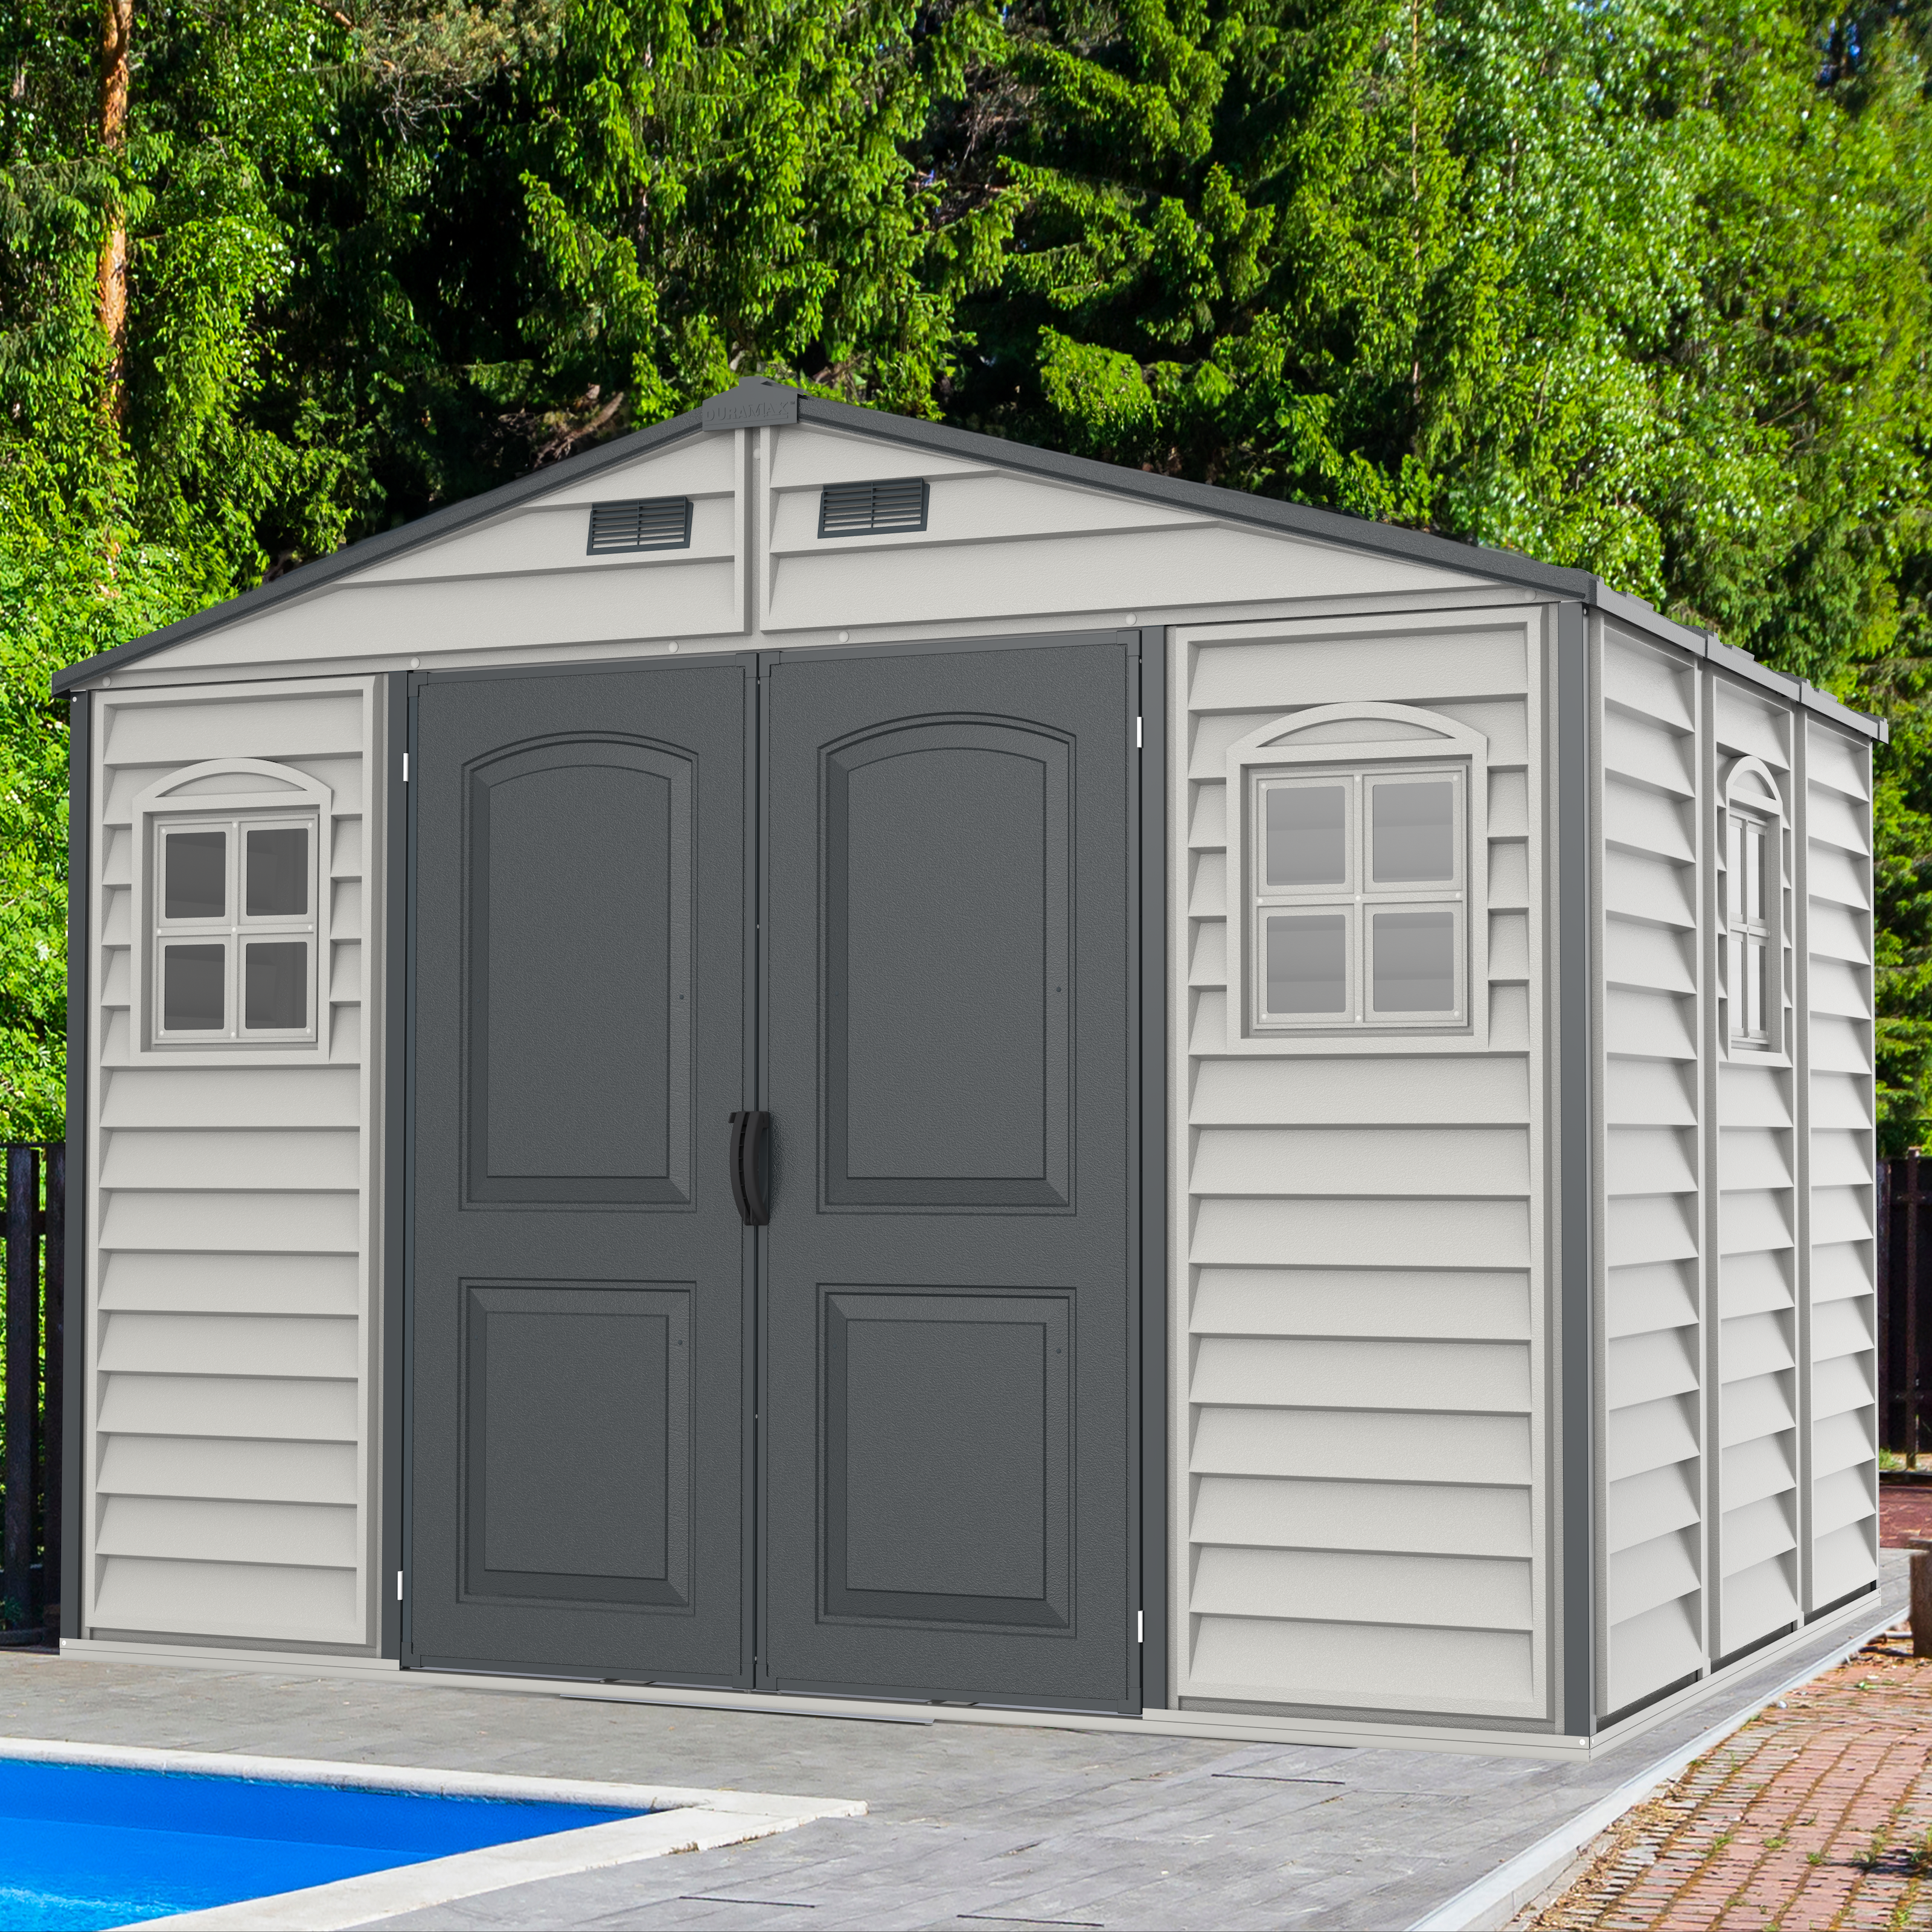 Duramax Woodside Plus 10.5x8 Vinyl Resin Outdoor Storage Shed With Foundation Kit